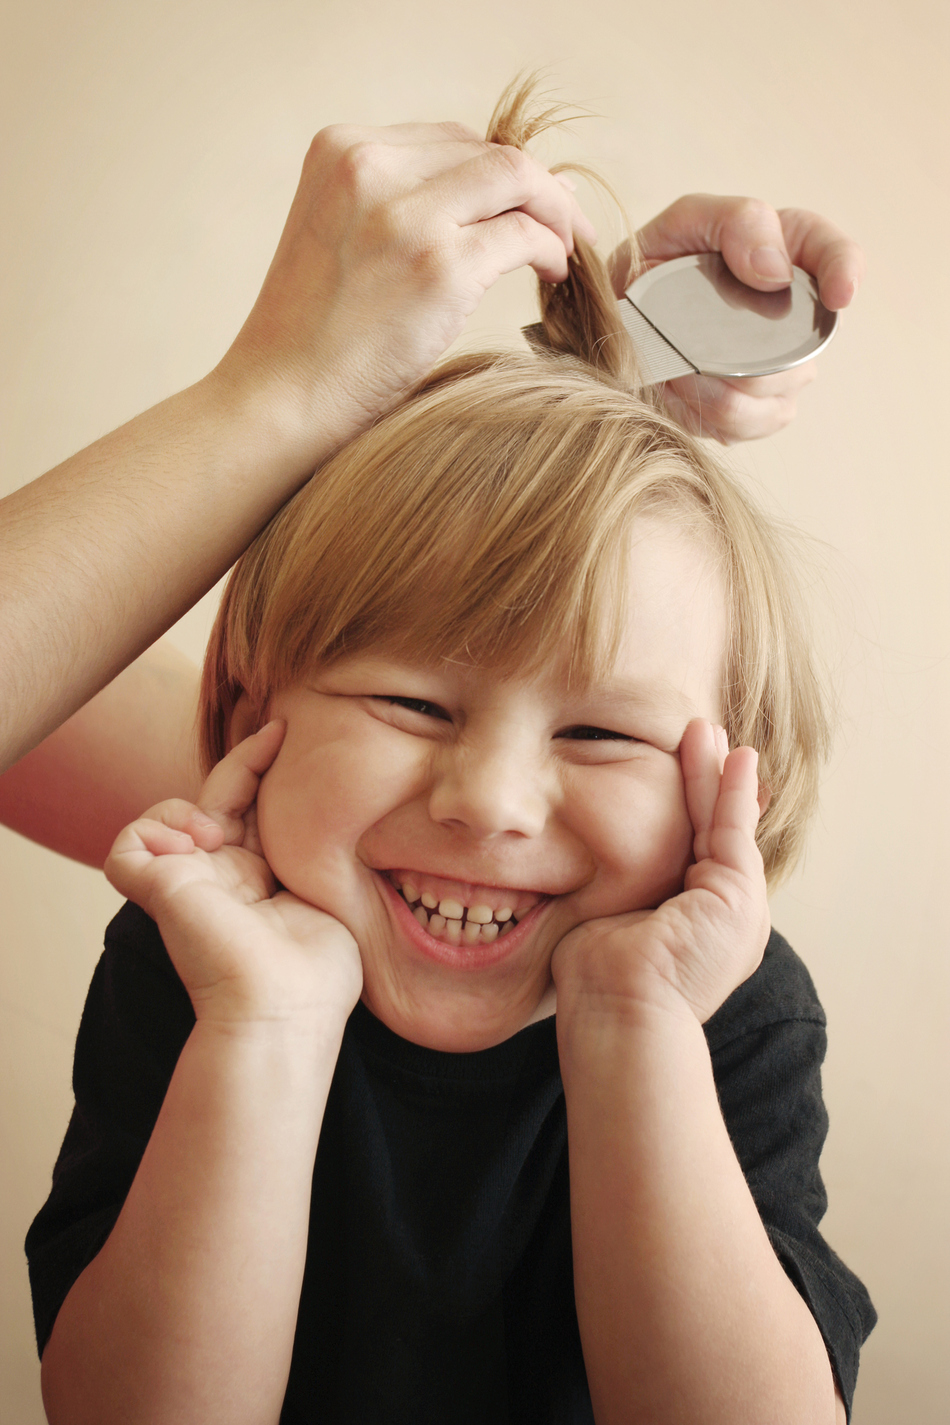 What to Do If Your Child Has Lice